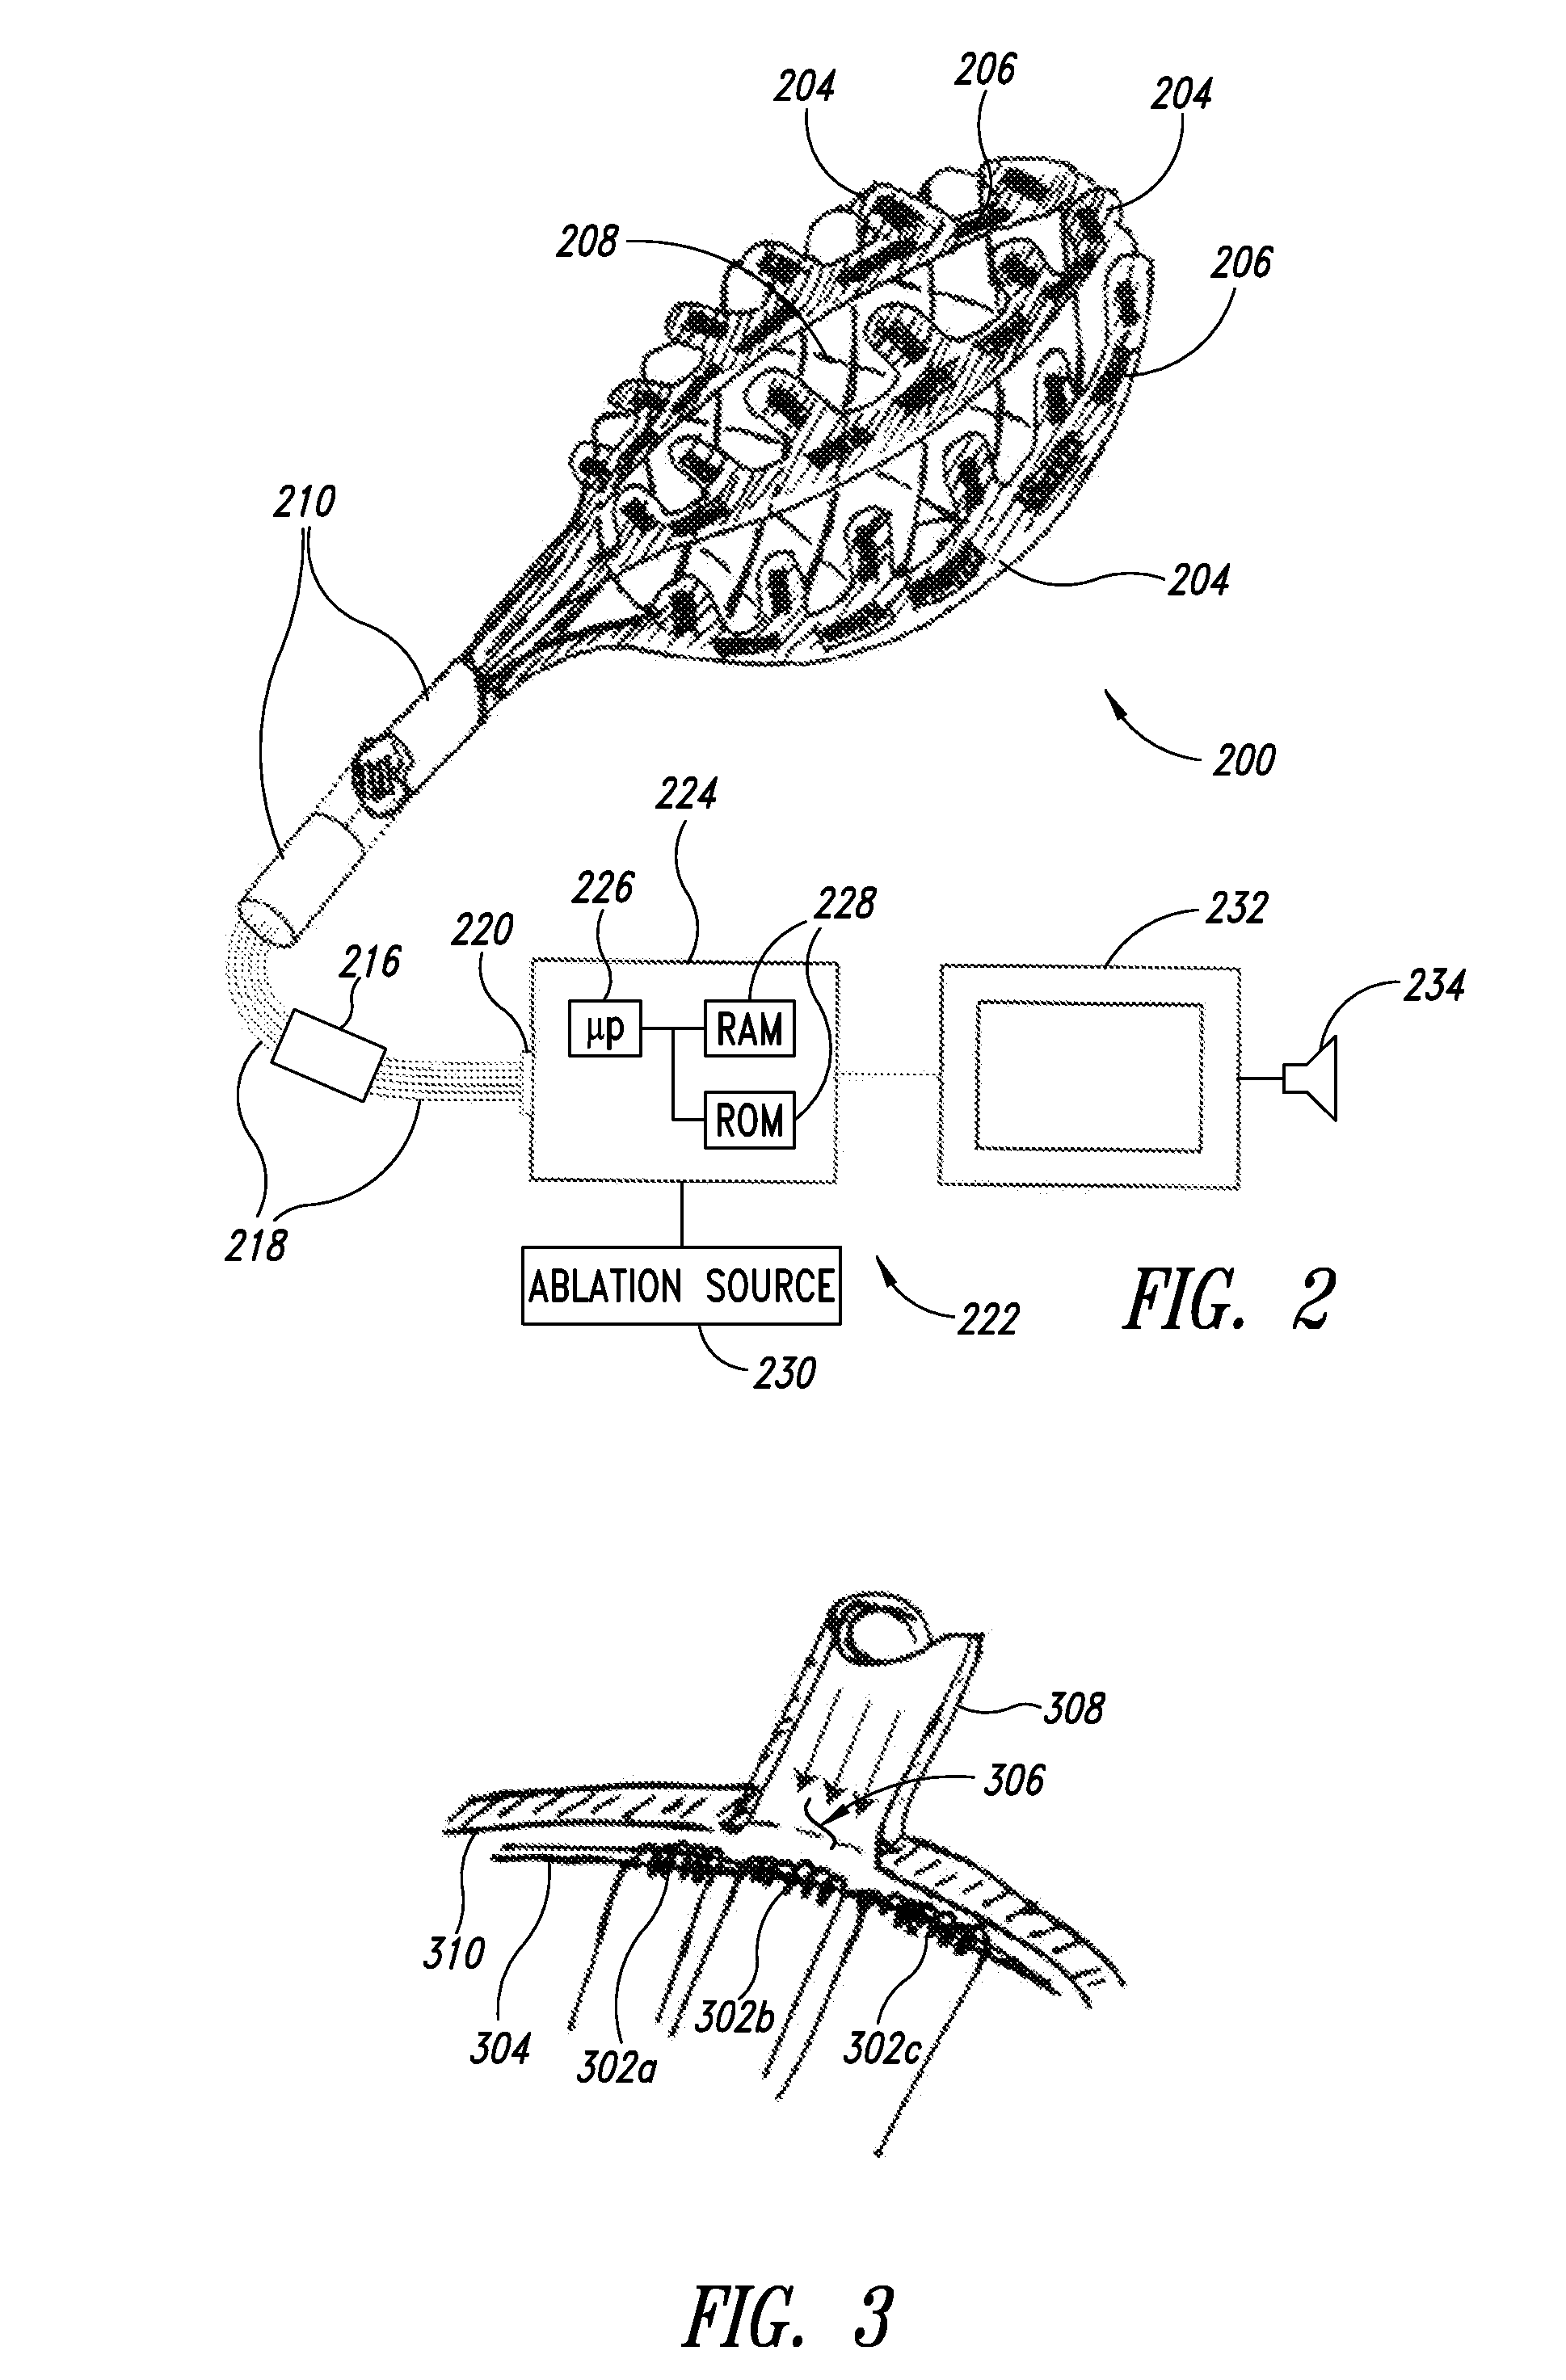 Medical device for use in bodily lumens, for example an atrium